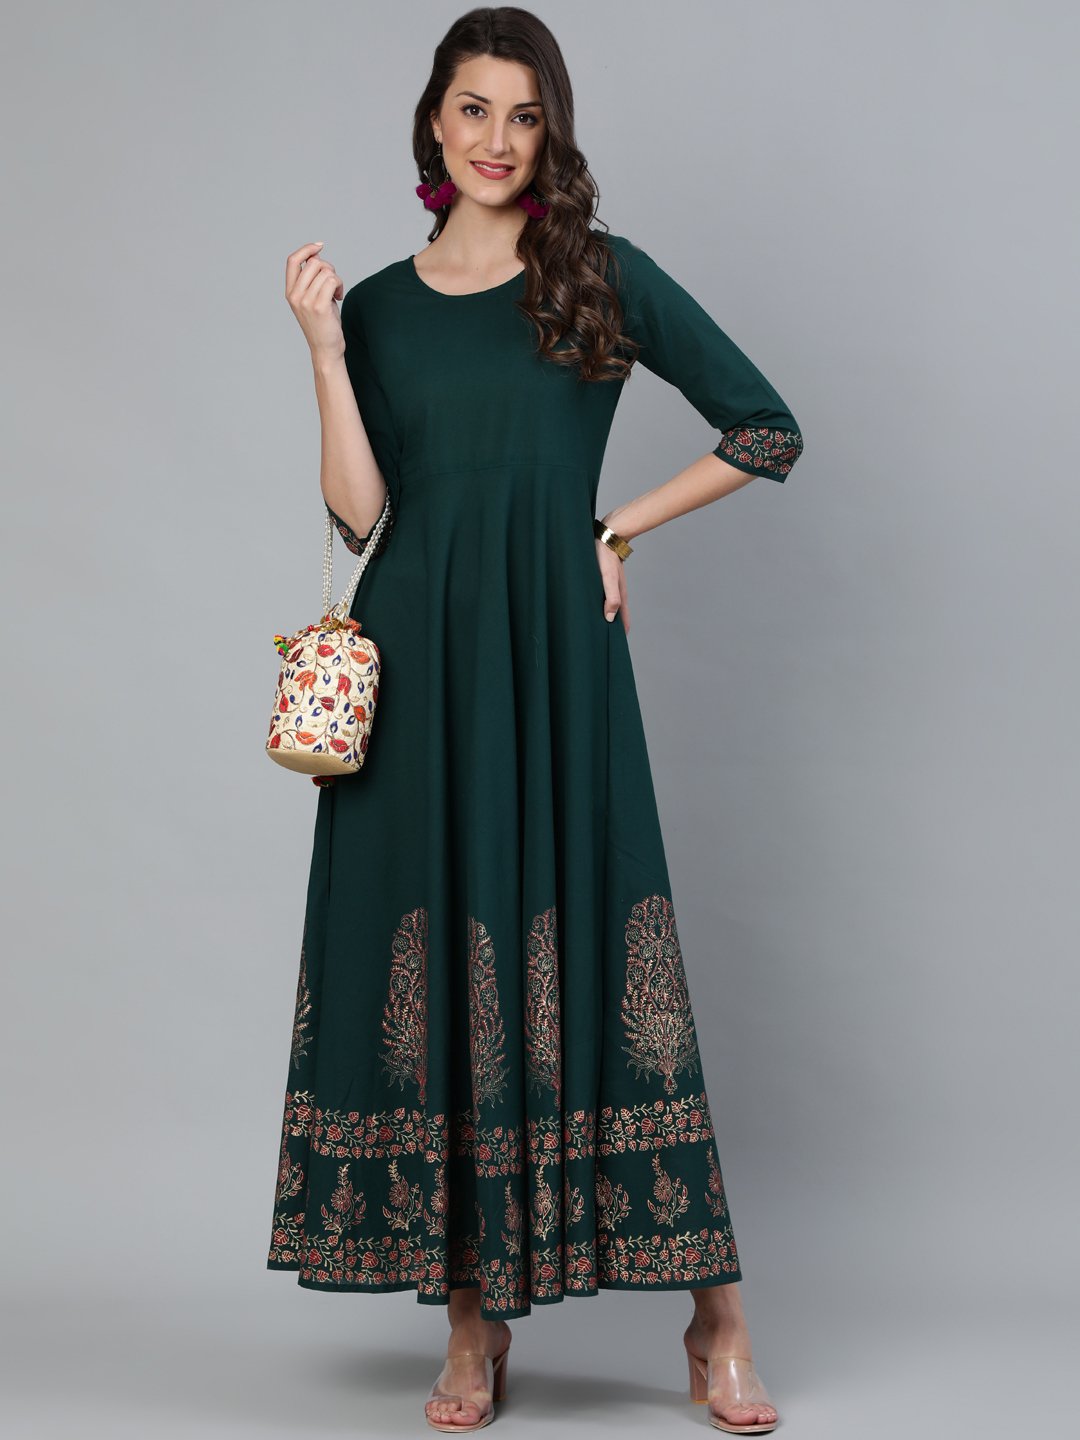 Women's Green & Gold Block Printed Maxi Dress With Three Quarter Sleeves - Nayo Clothing